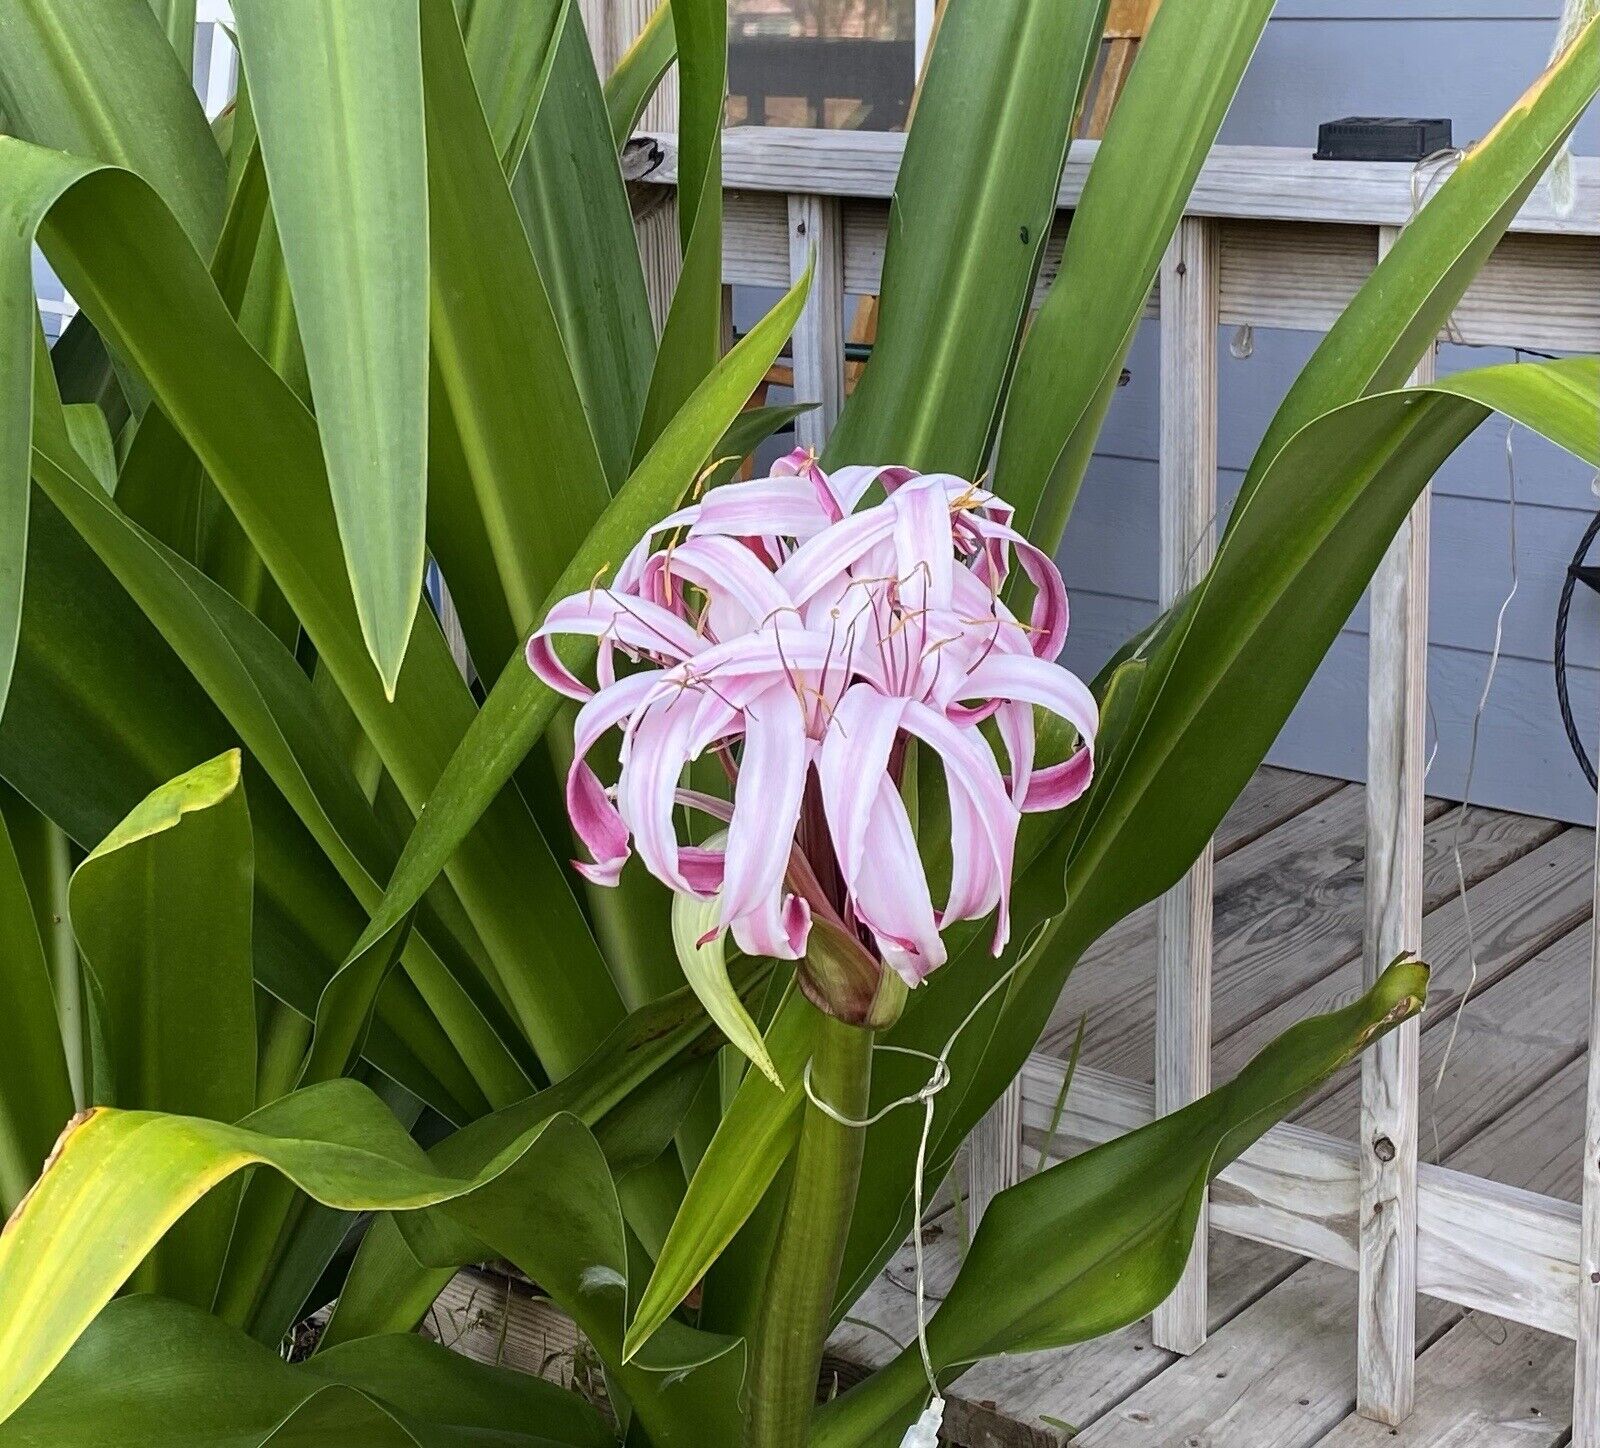 crinum lily, c. asiaticum, giant white spider lily bulbs